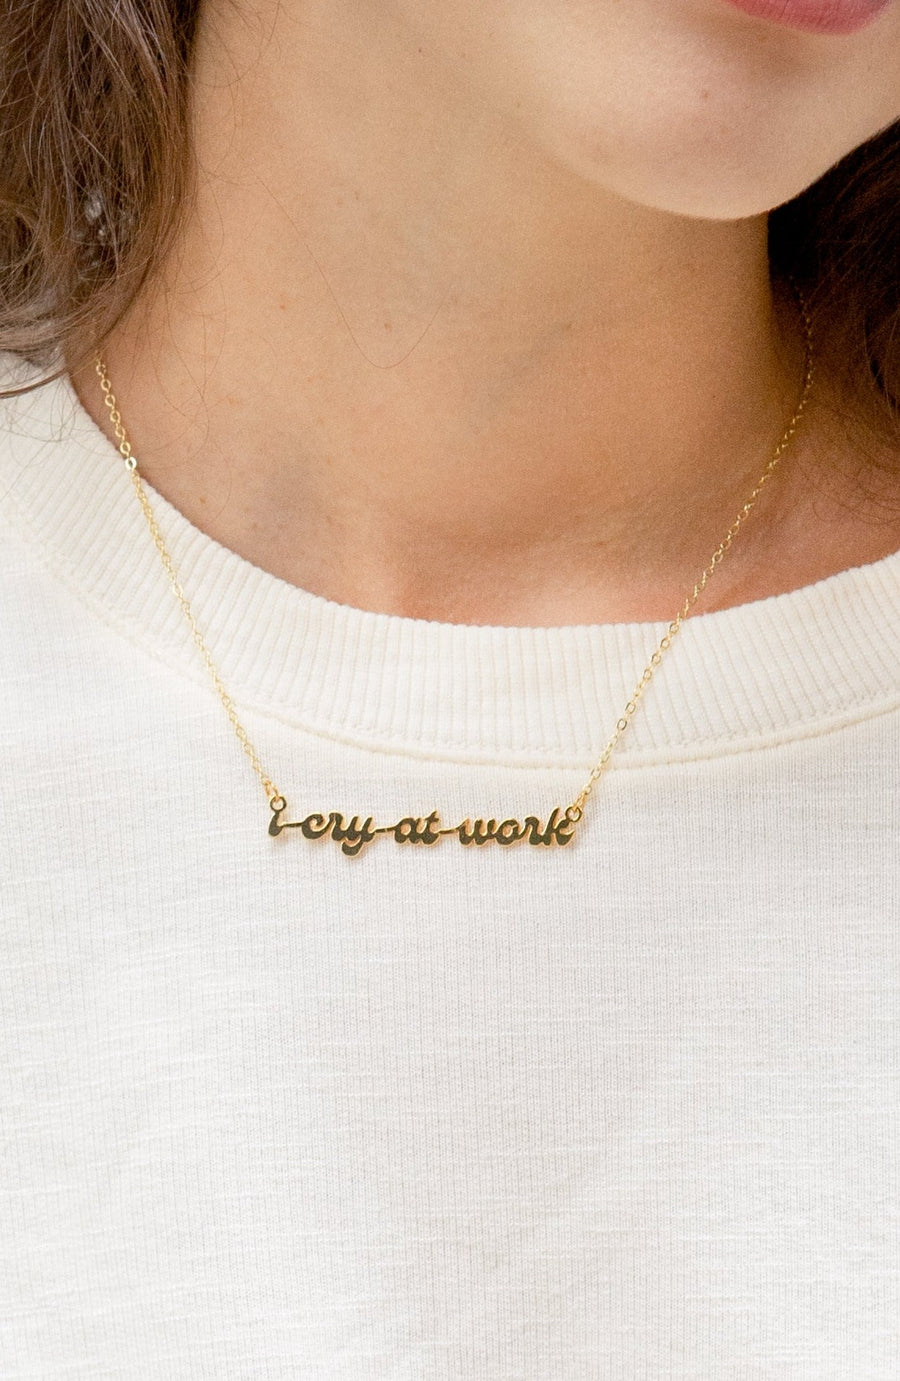 I Cry At Work Necklace